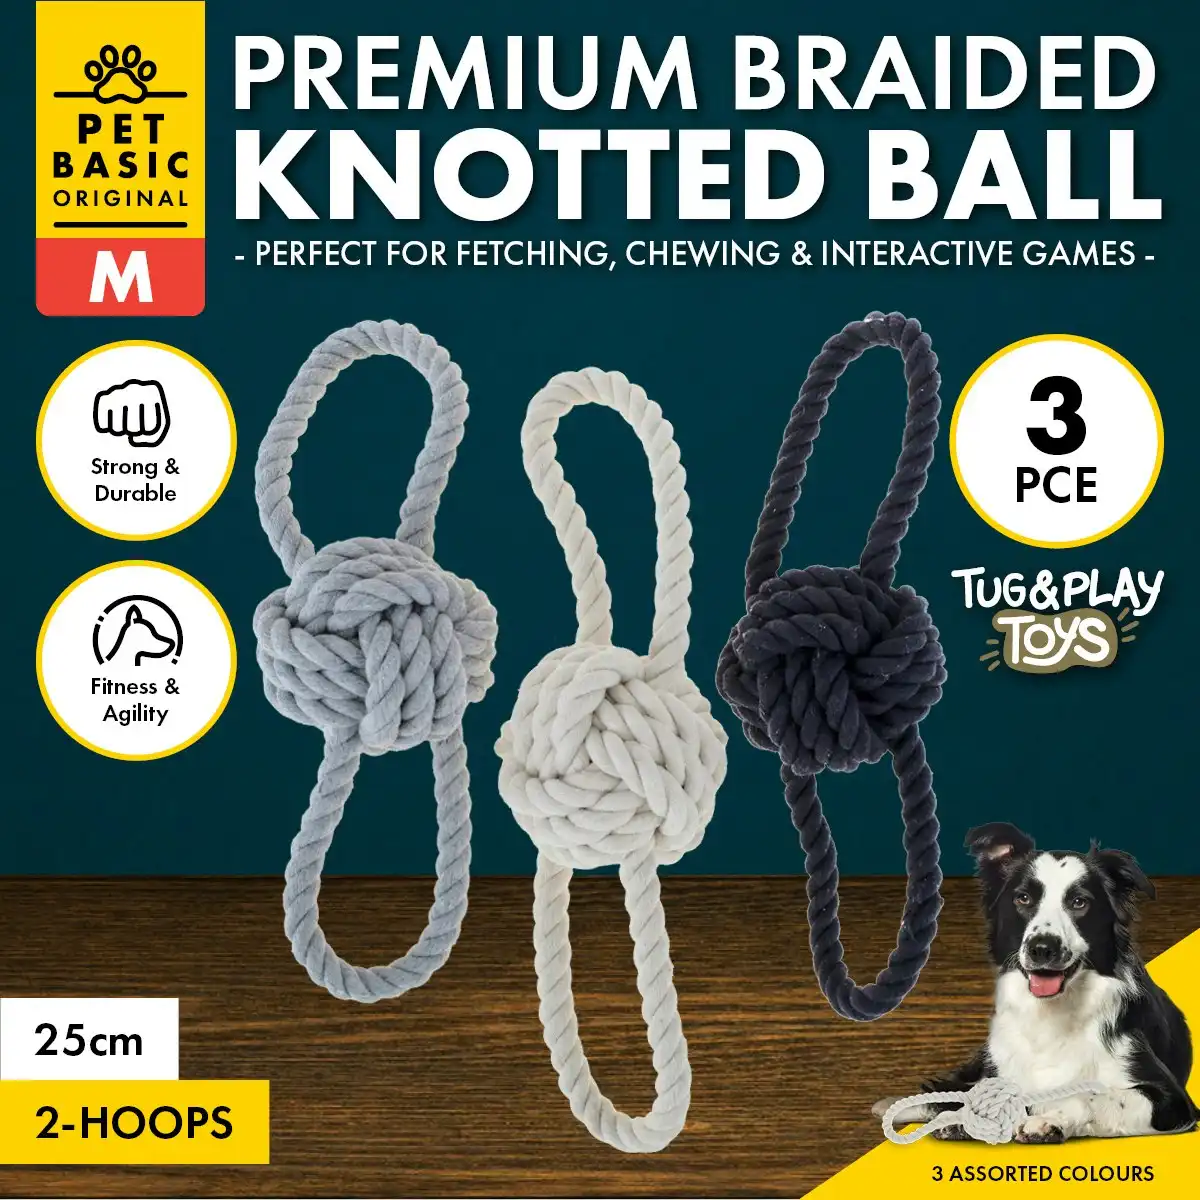 Pet Basic 3PCE Premium Braided Rope Knotted Ball & Loops Natural Fibres 25cm